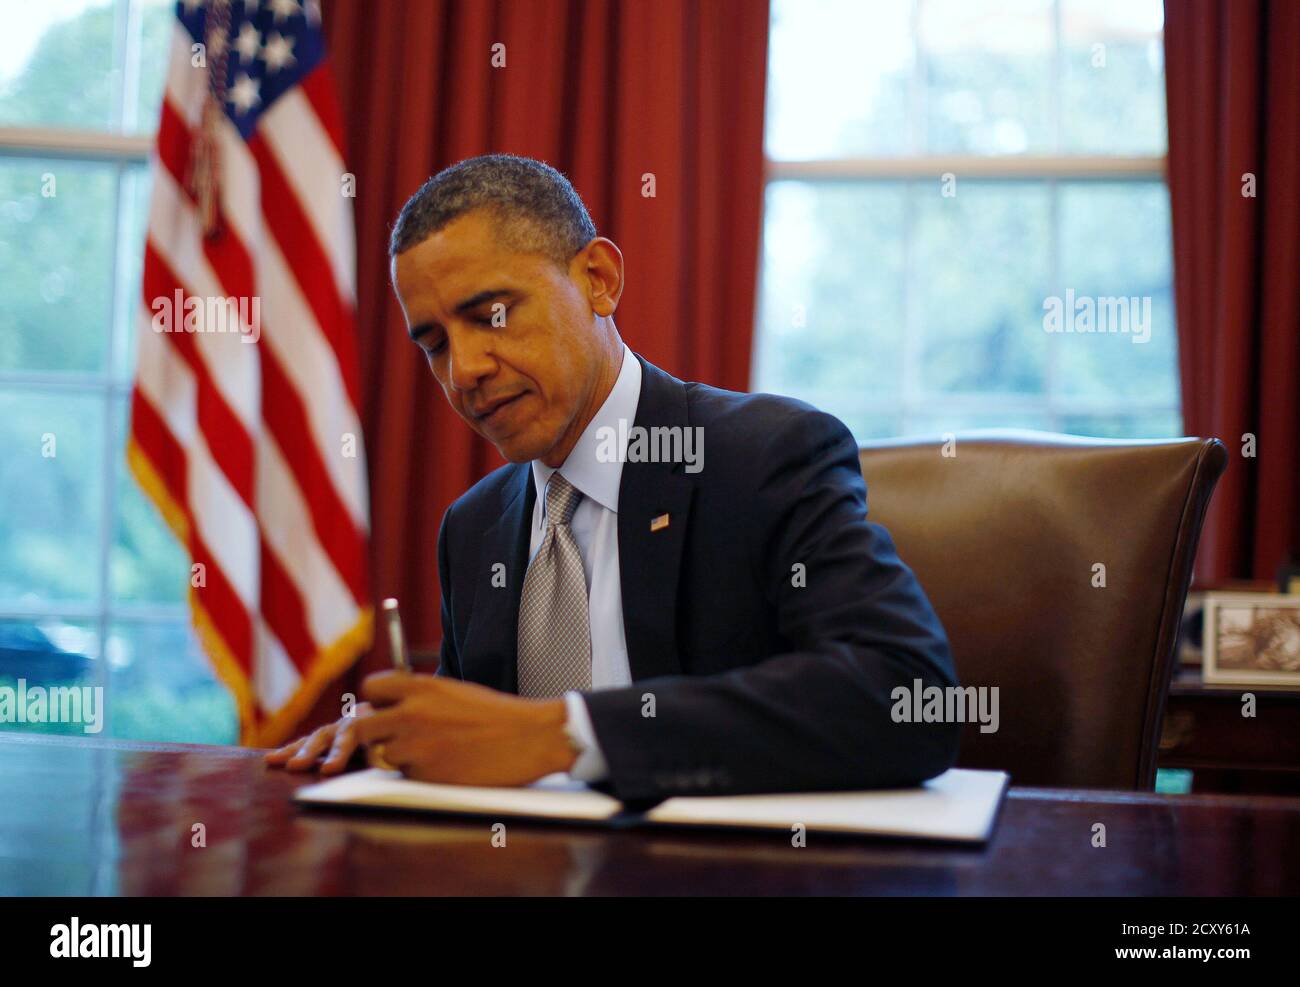 U.S. President Barack Obama signs a proclamation to designate federal lands within the former Fort Ord as a national monument under the Antiquities Act, in the Oval Office of the White House in Washington, April 20, 2012.   REUTERS/Jason Reed   (UNITED STATES - Tags: POLITICS) Stock Photo